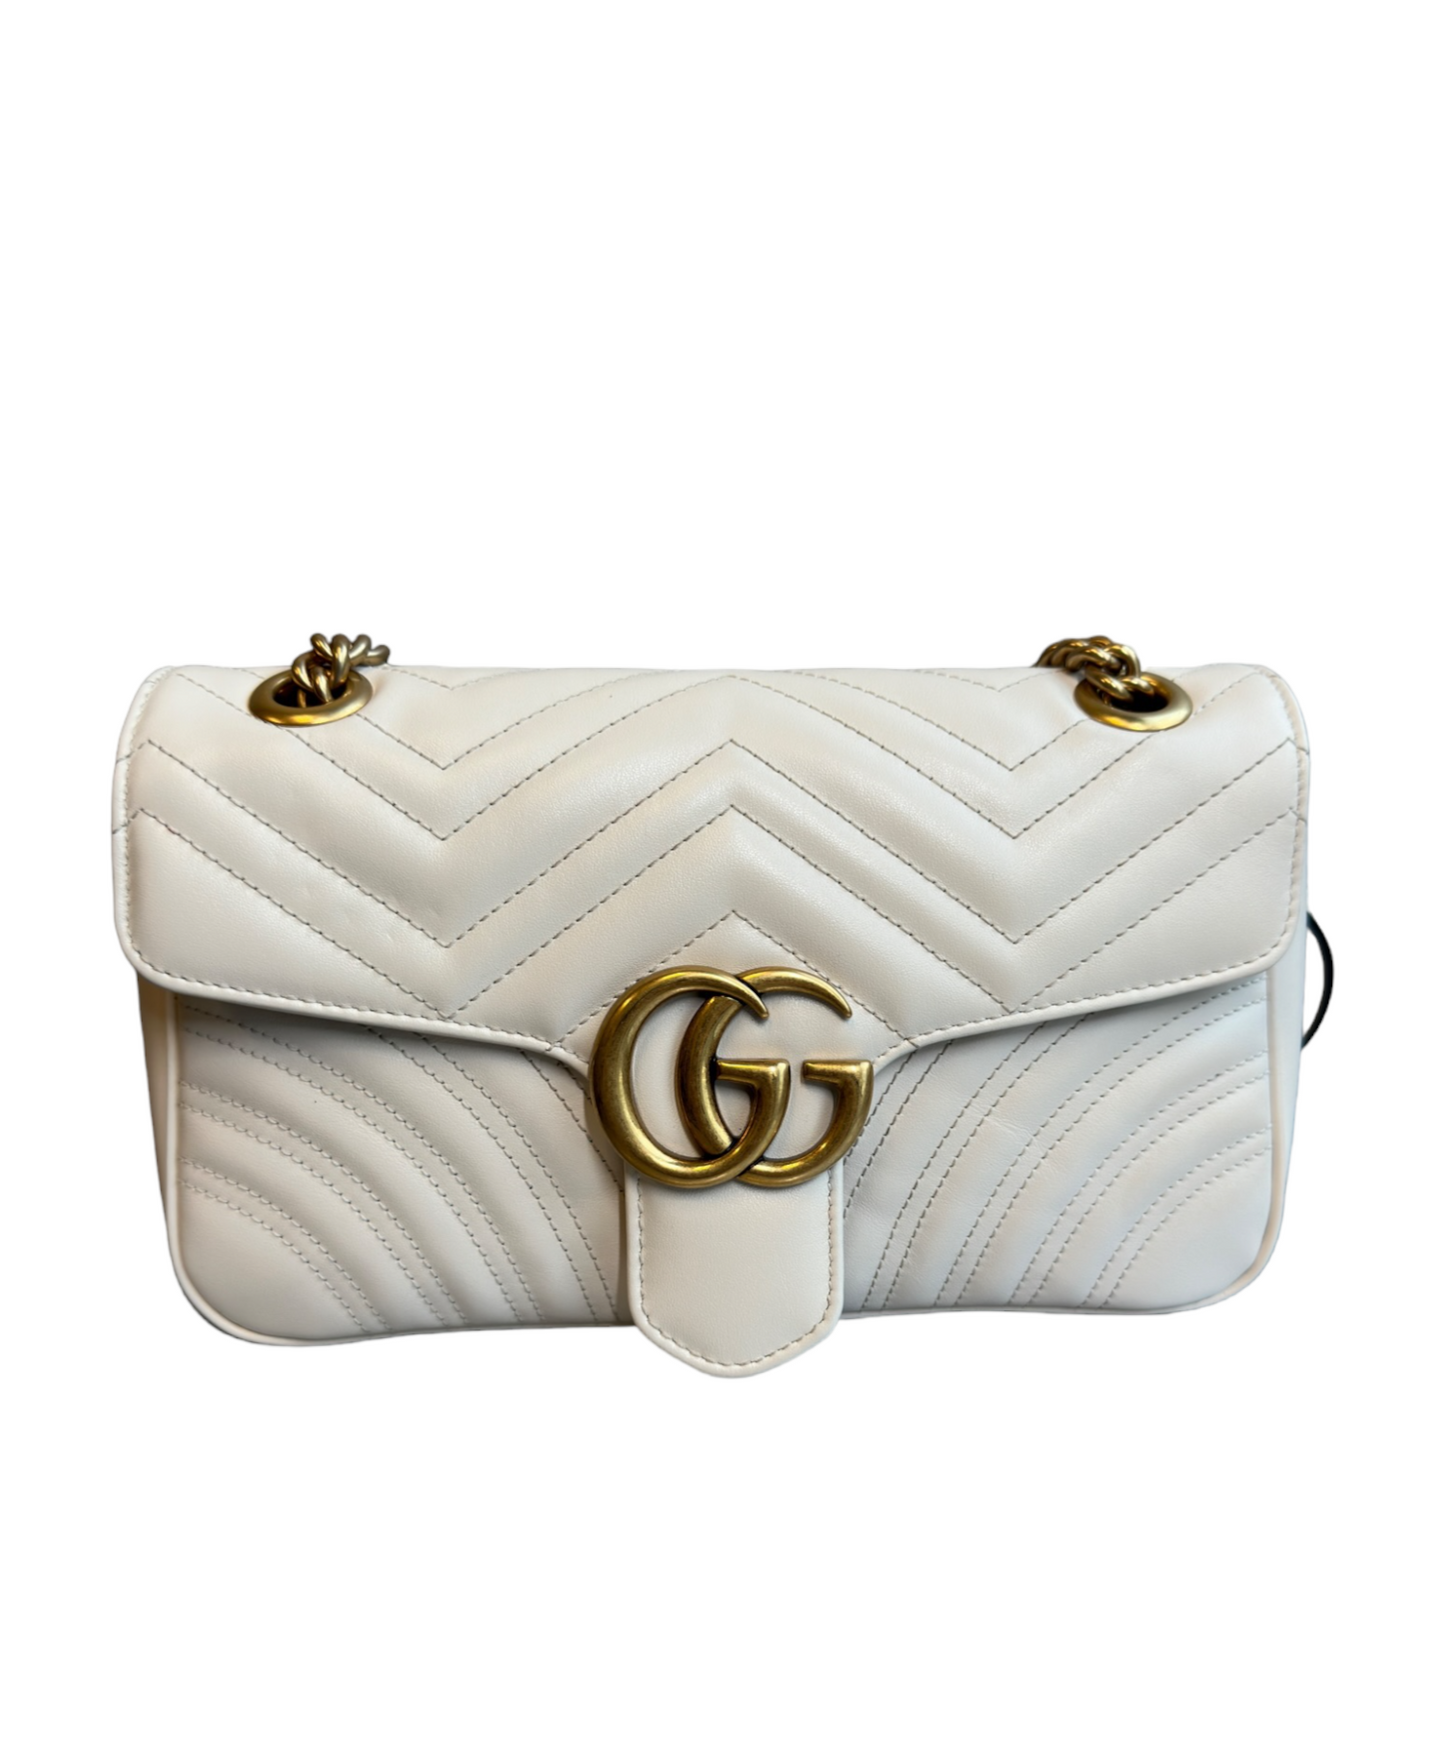 GUCCI - GG Marmont Shoulder bag small